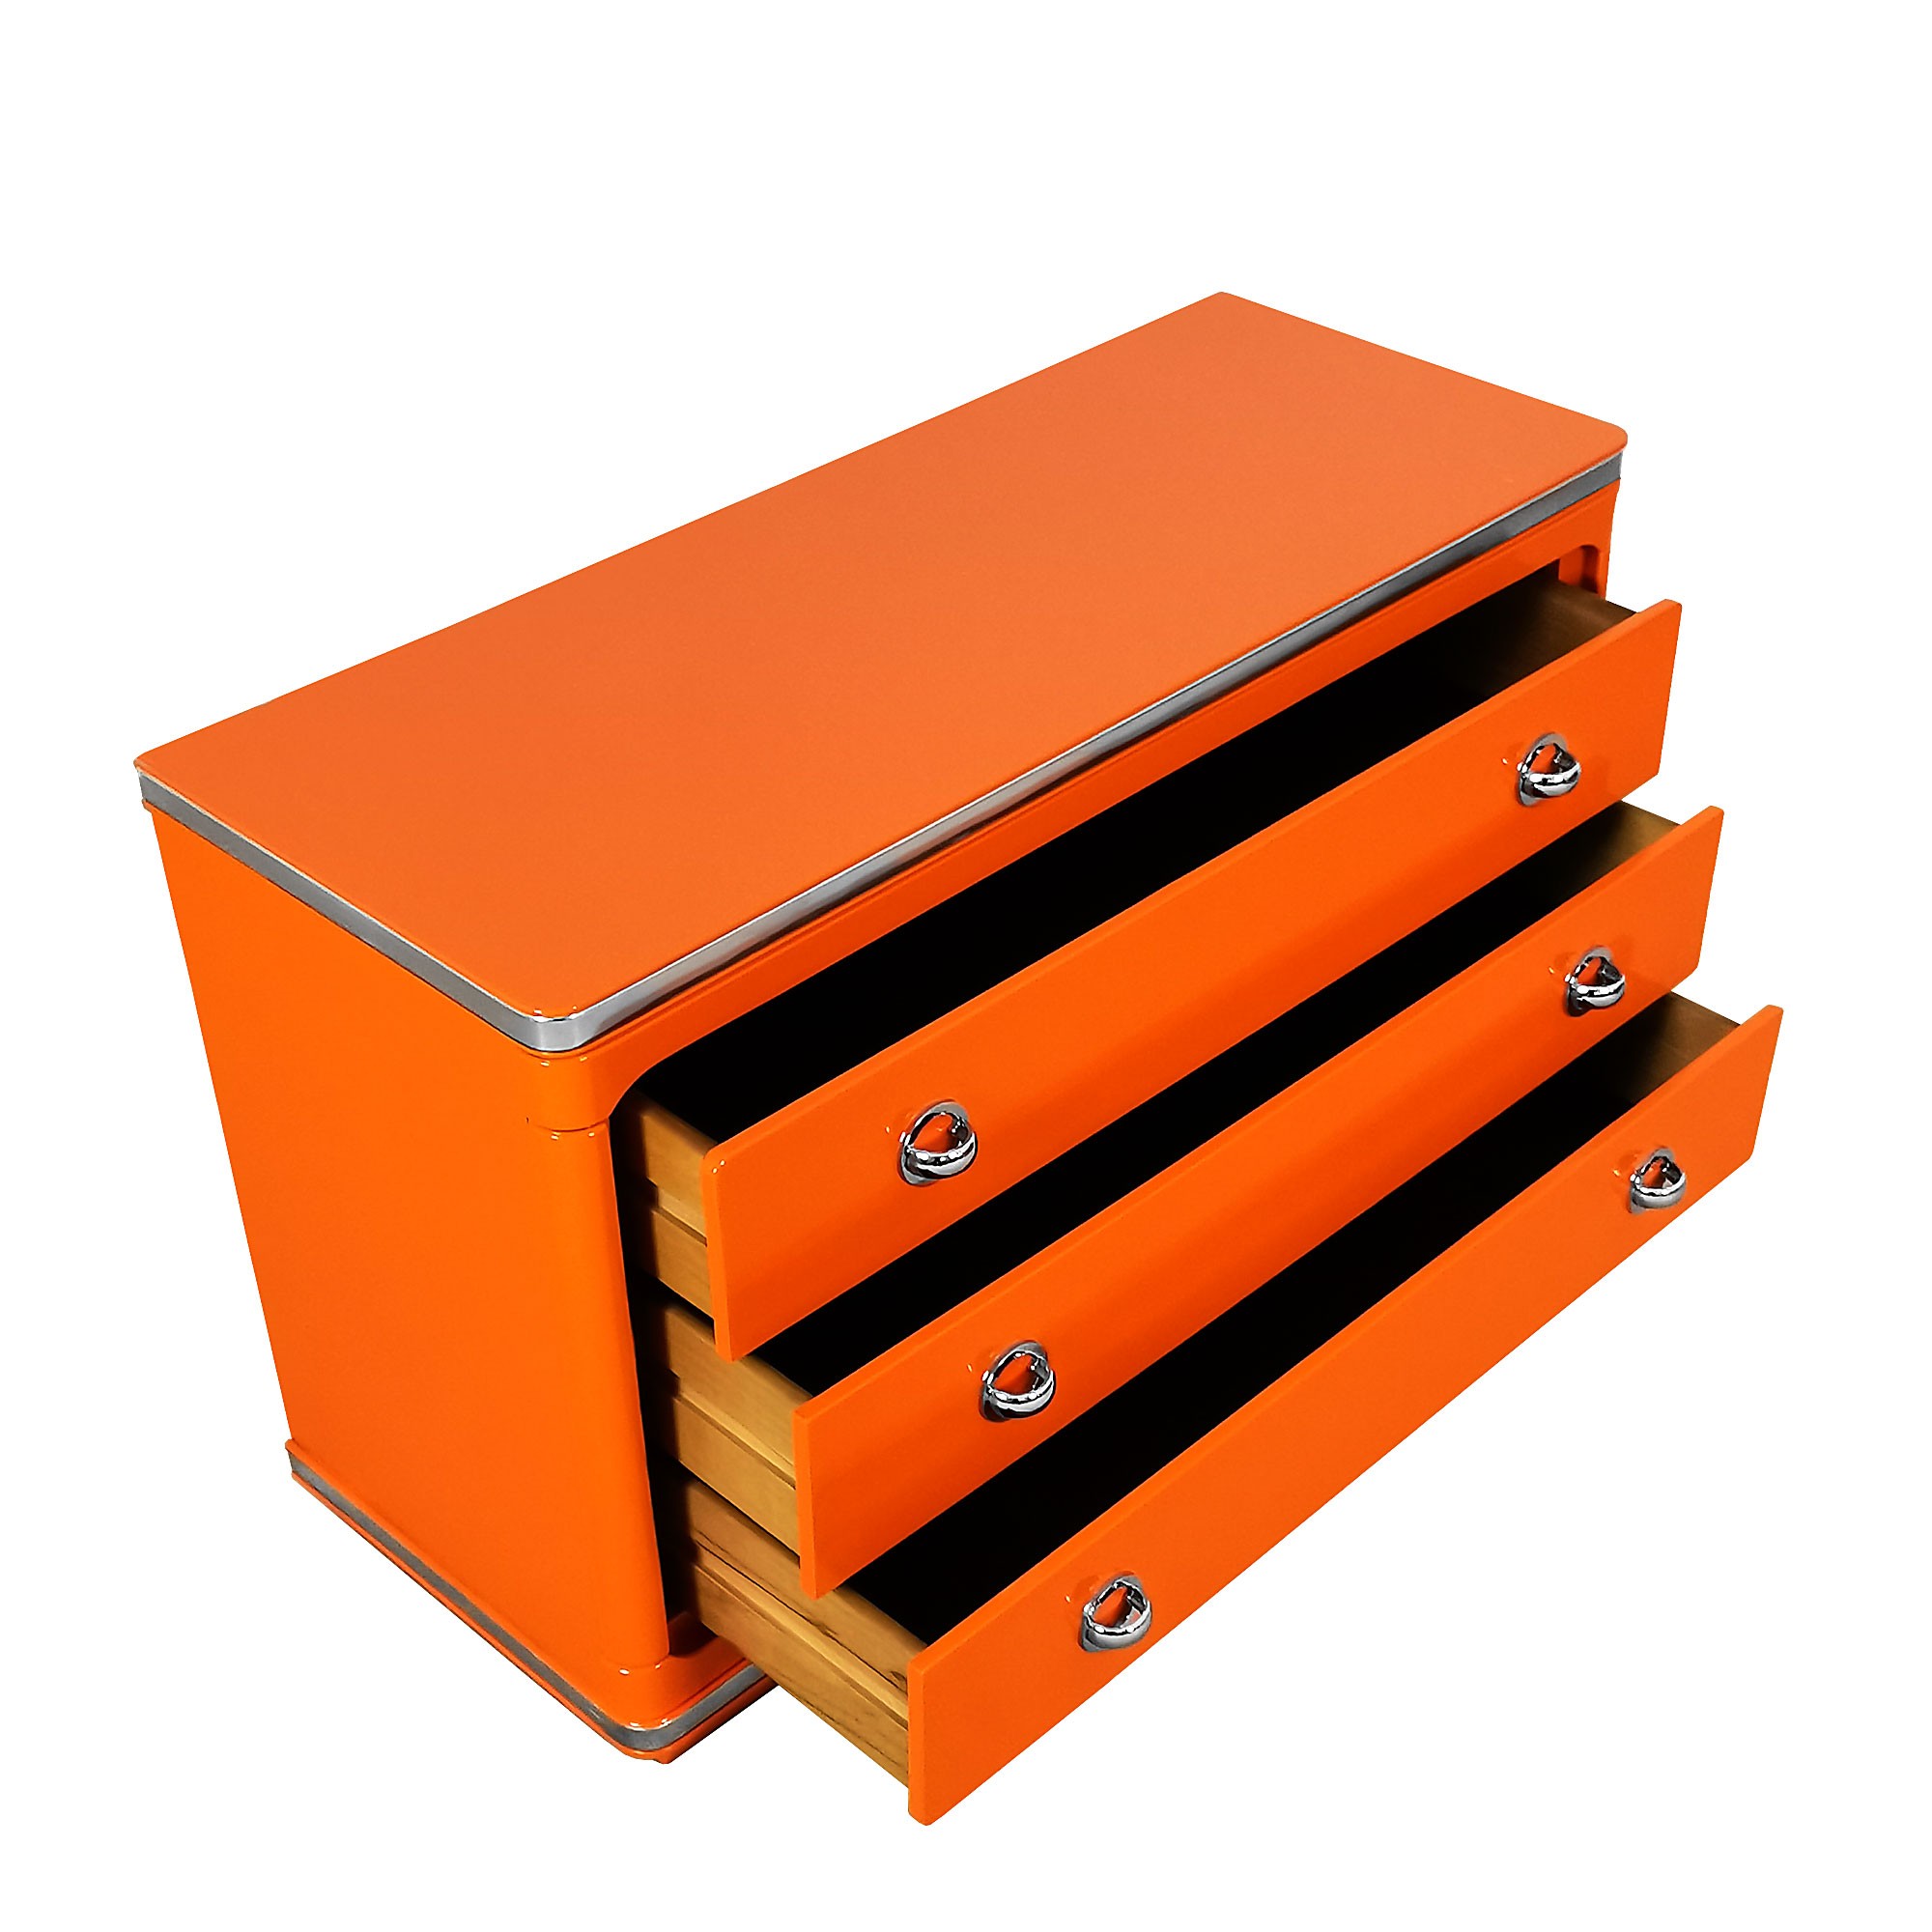 chests of drawers